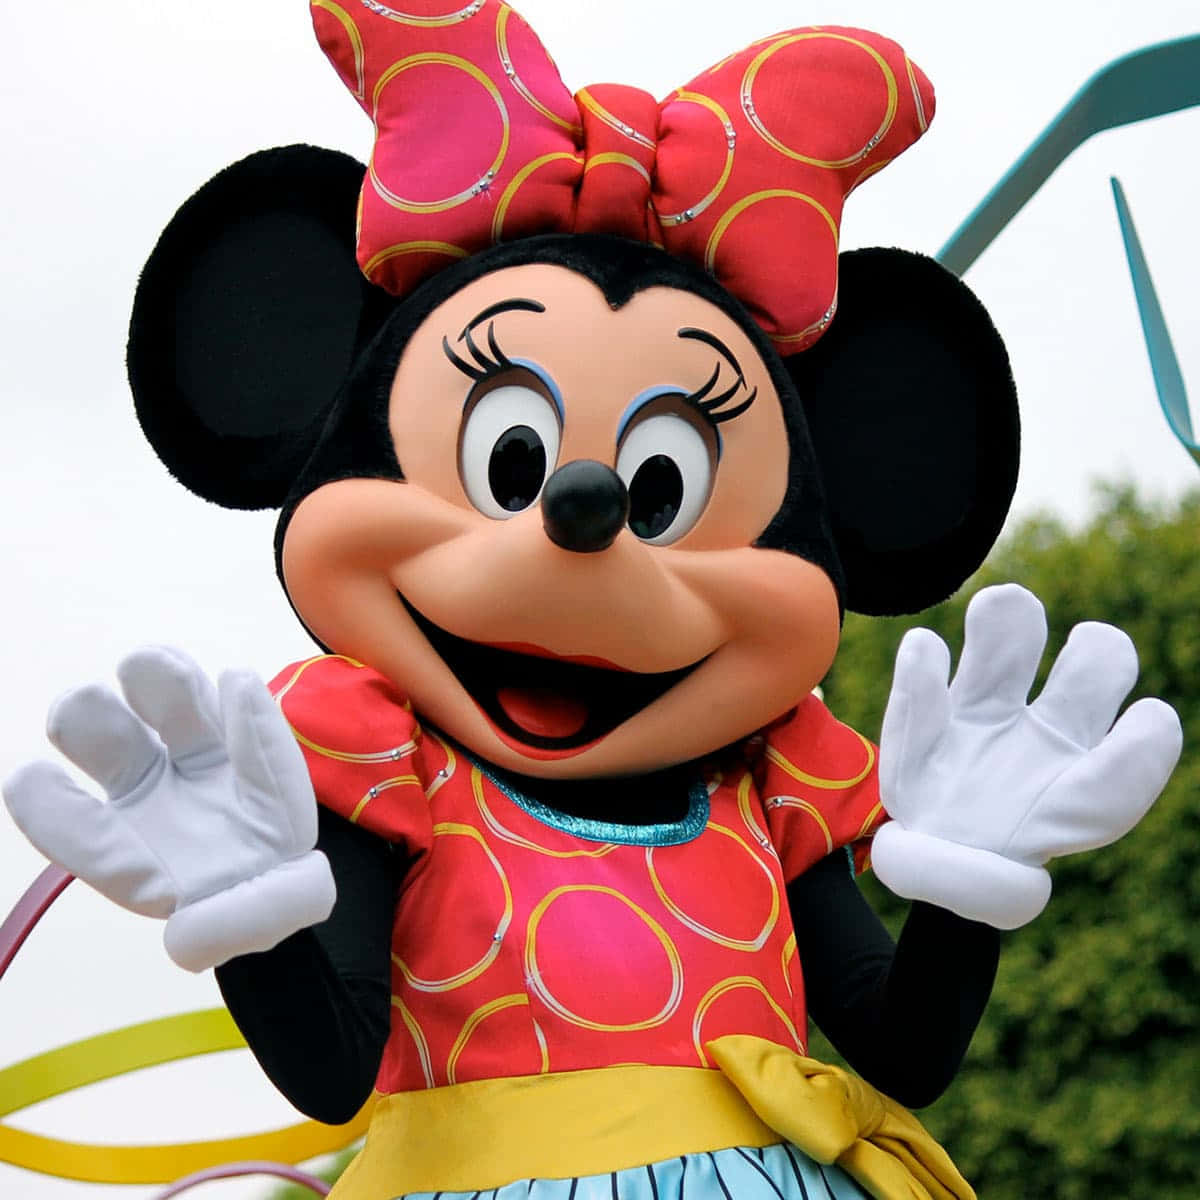 Minnie Mouse looking bubbly in her iconic red and white dress